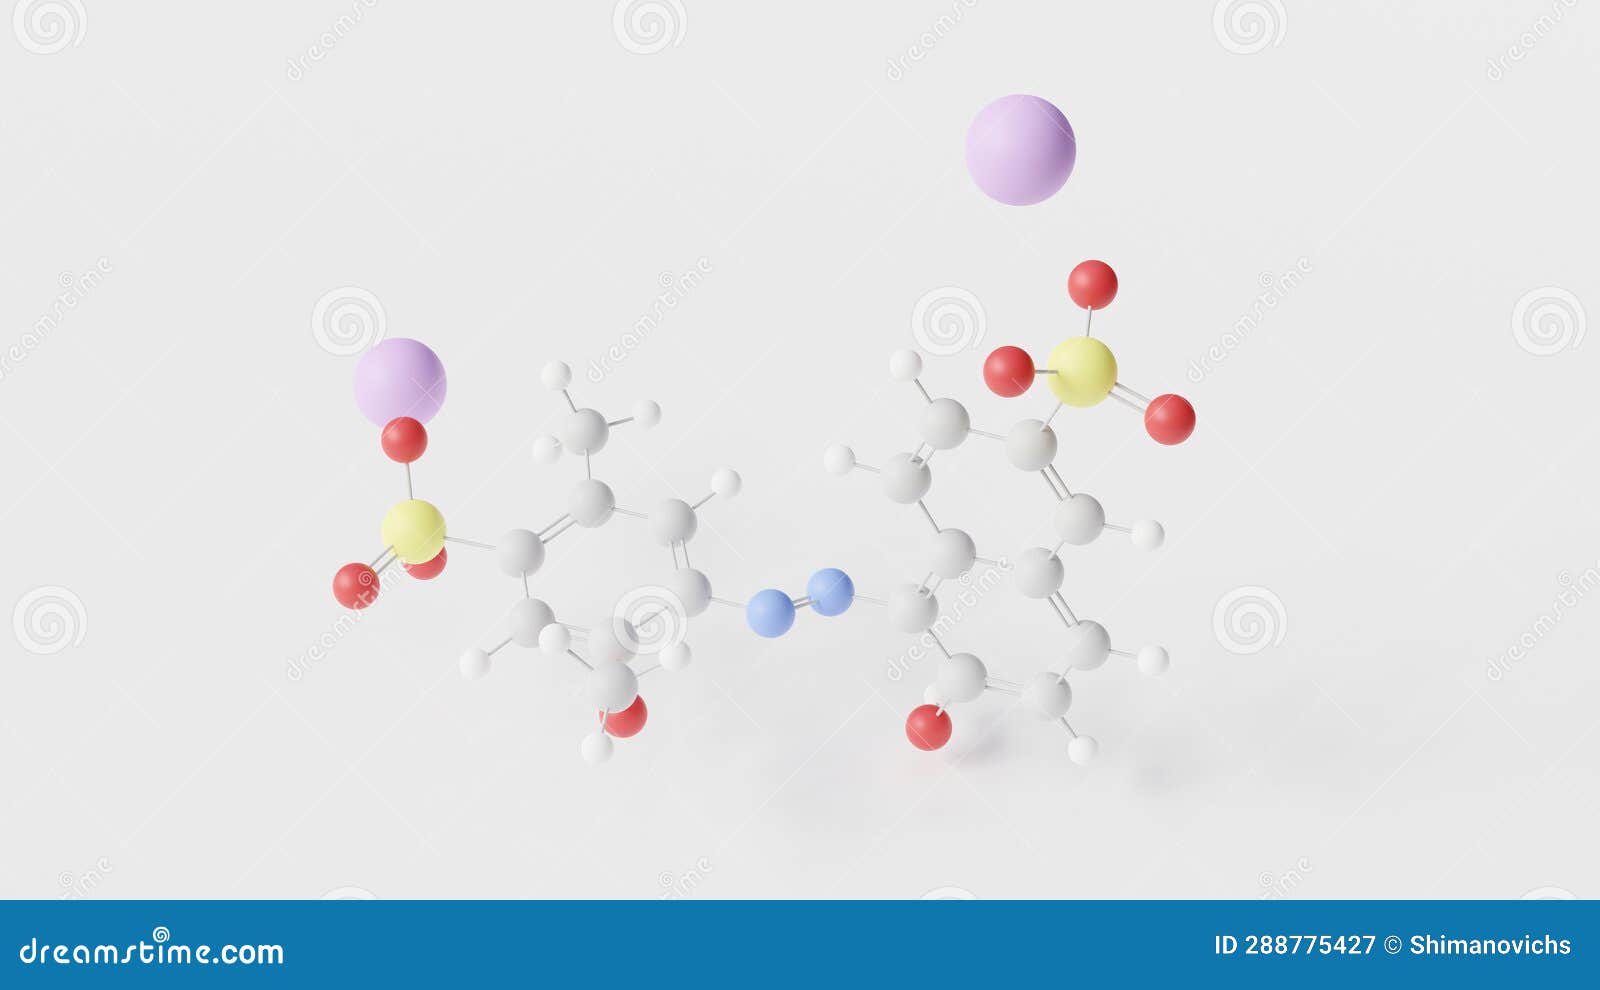 Allura Red Ac Molecule 3d, Molecular Structure, Ball and Stick Model,  Structural Chemical Formula Food Dye E129 Stock Illustration - Illustration  of objects, colorings: 288775427